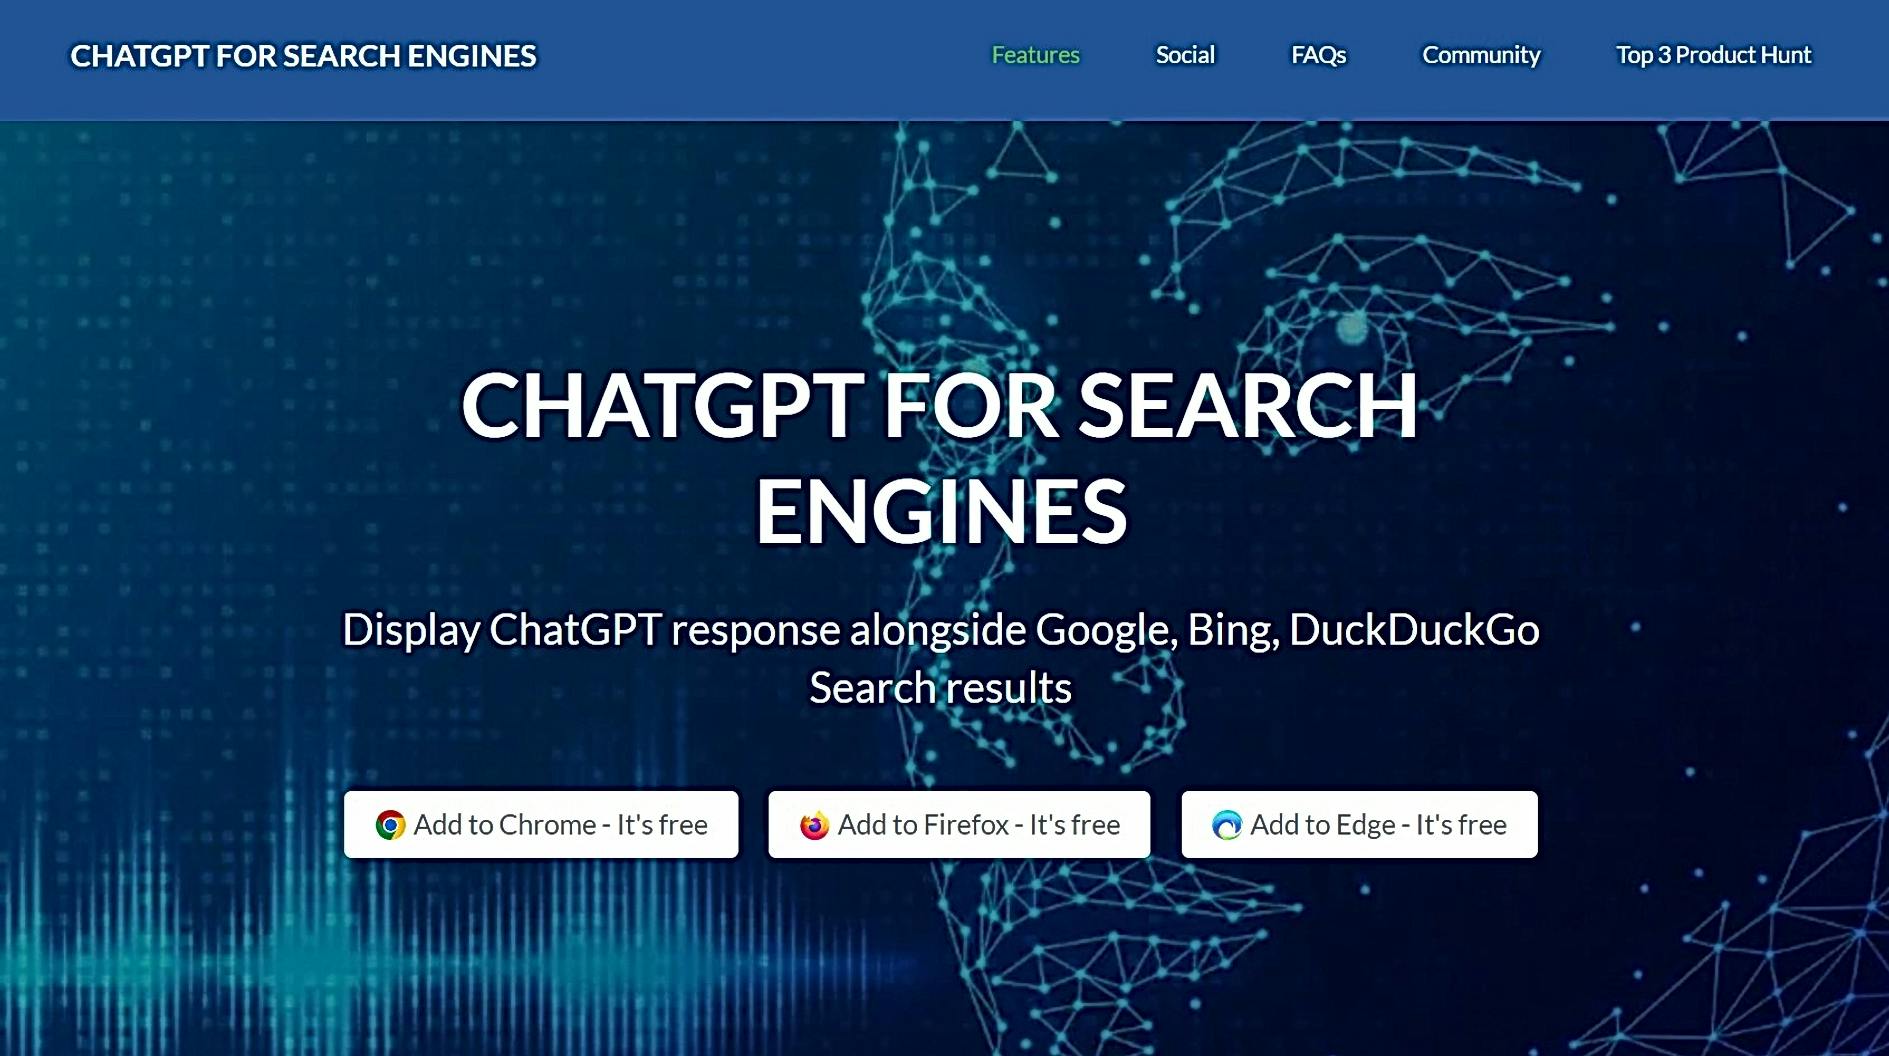 ChatGPT For Search Engines featured